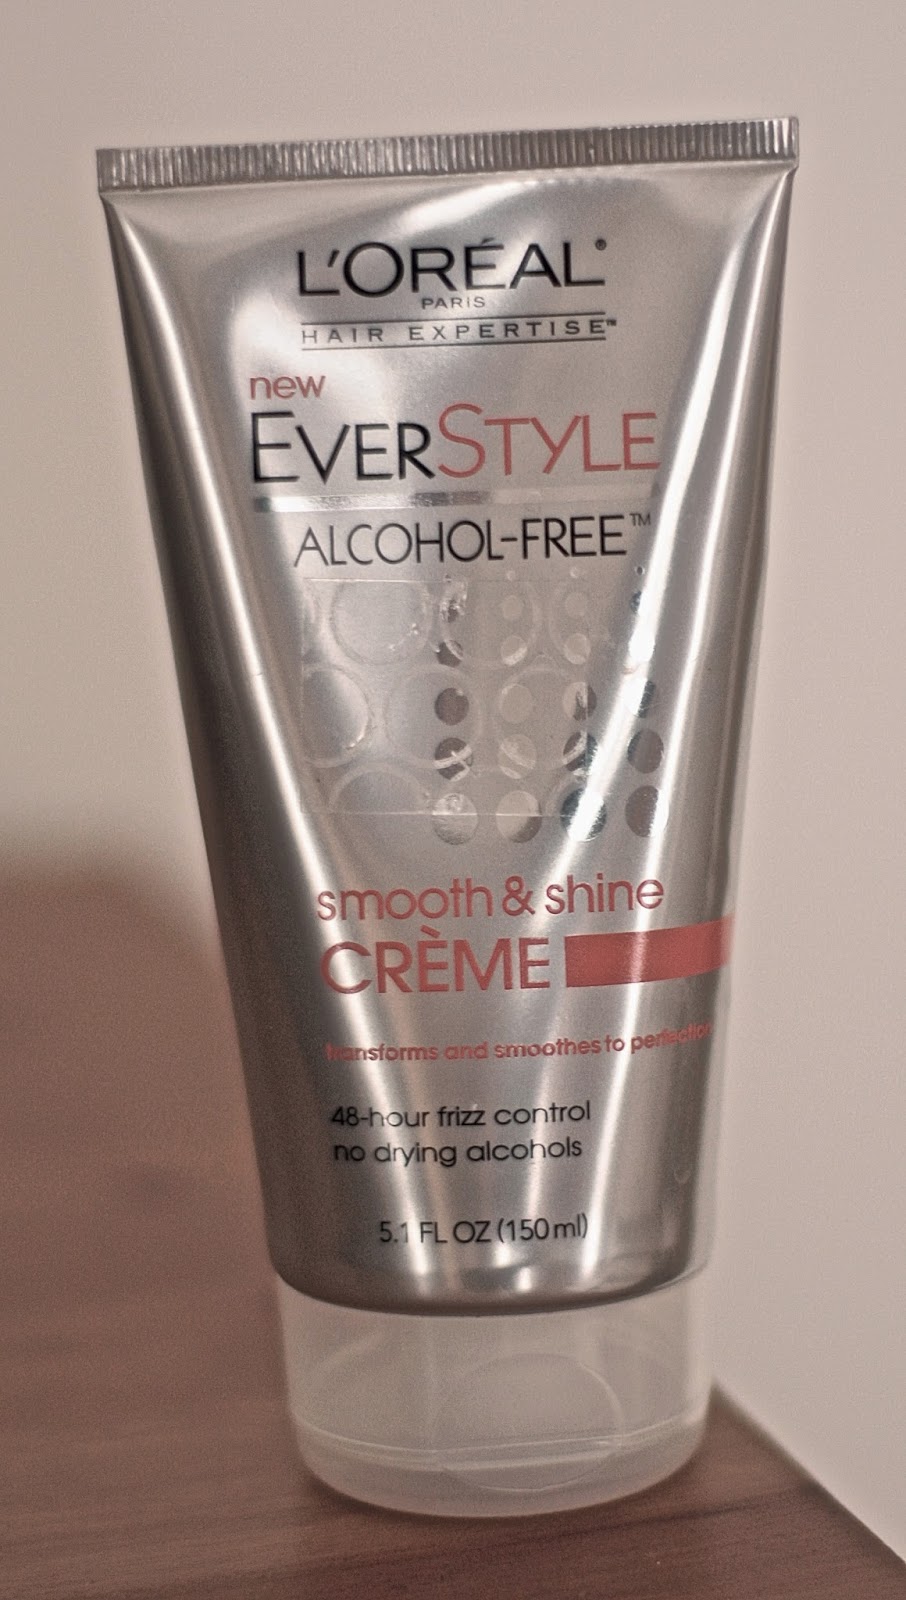 L'Oreal EverStyle Smooth & Shine Creme alcohol-free